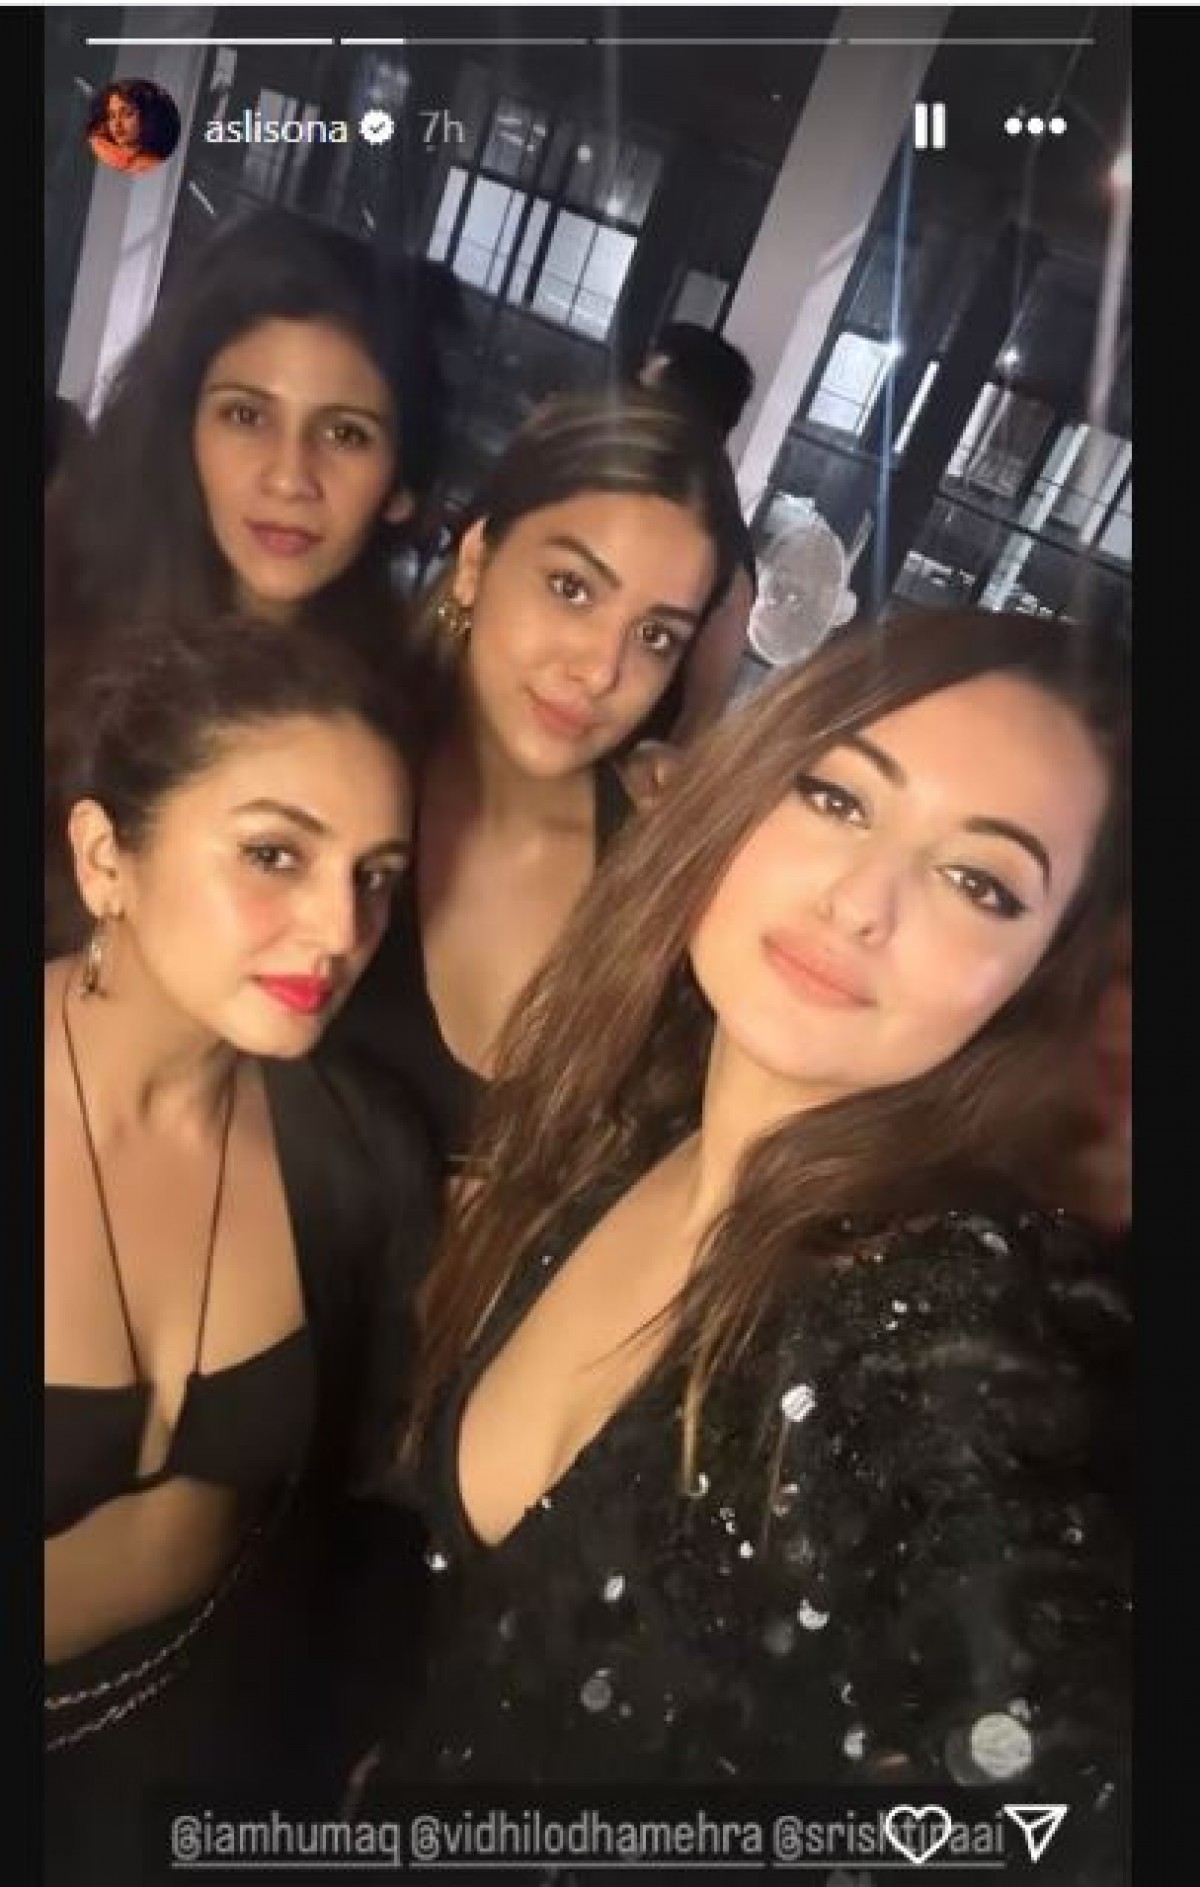 Wearing a black dress, Sonakshi rocked the bachelor party with her girl gang! Zaheer also shared pictures with the boy gang